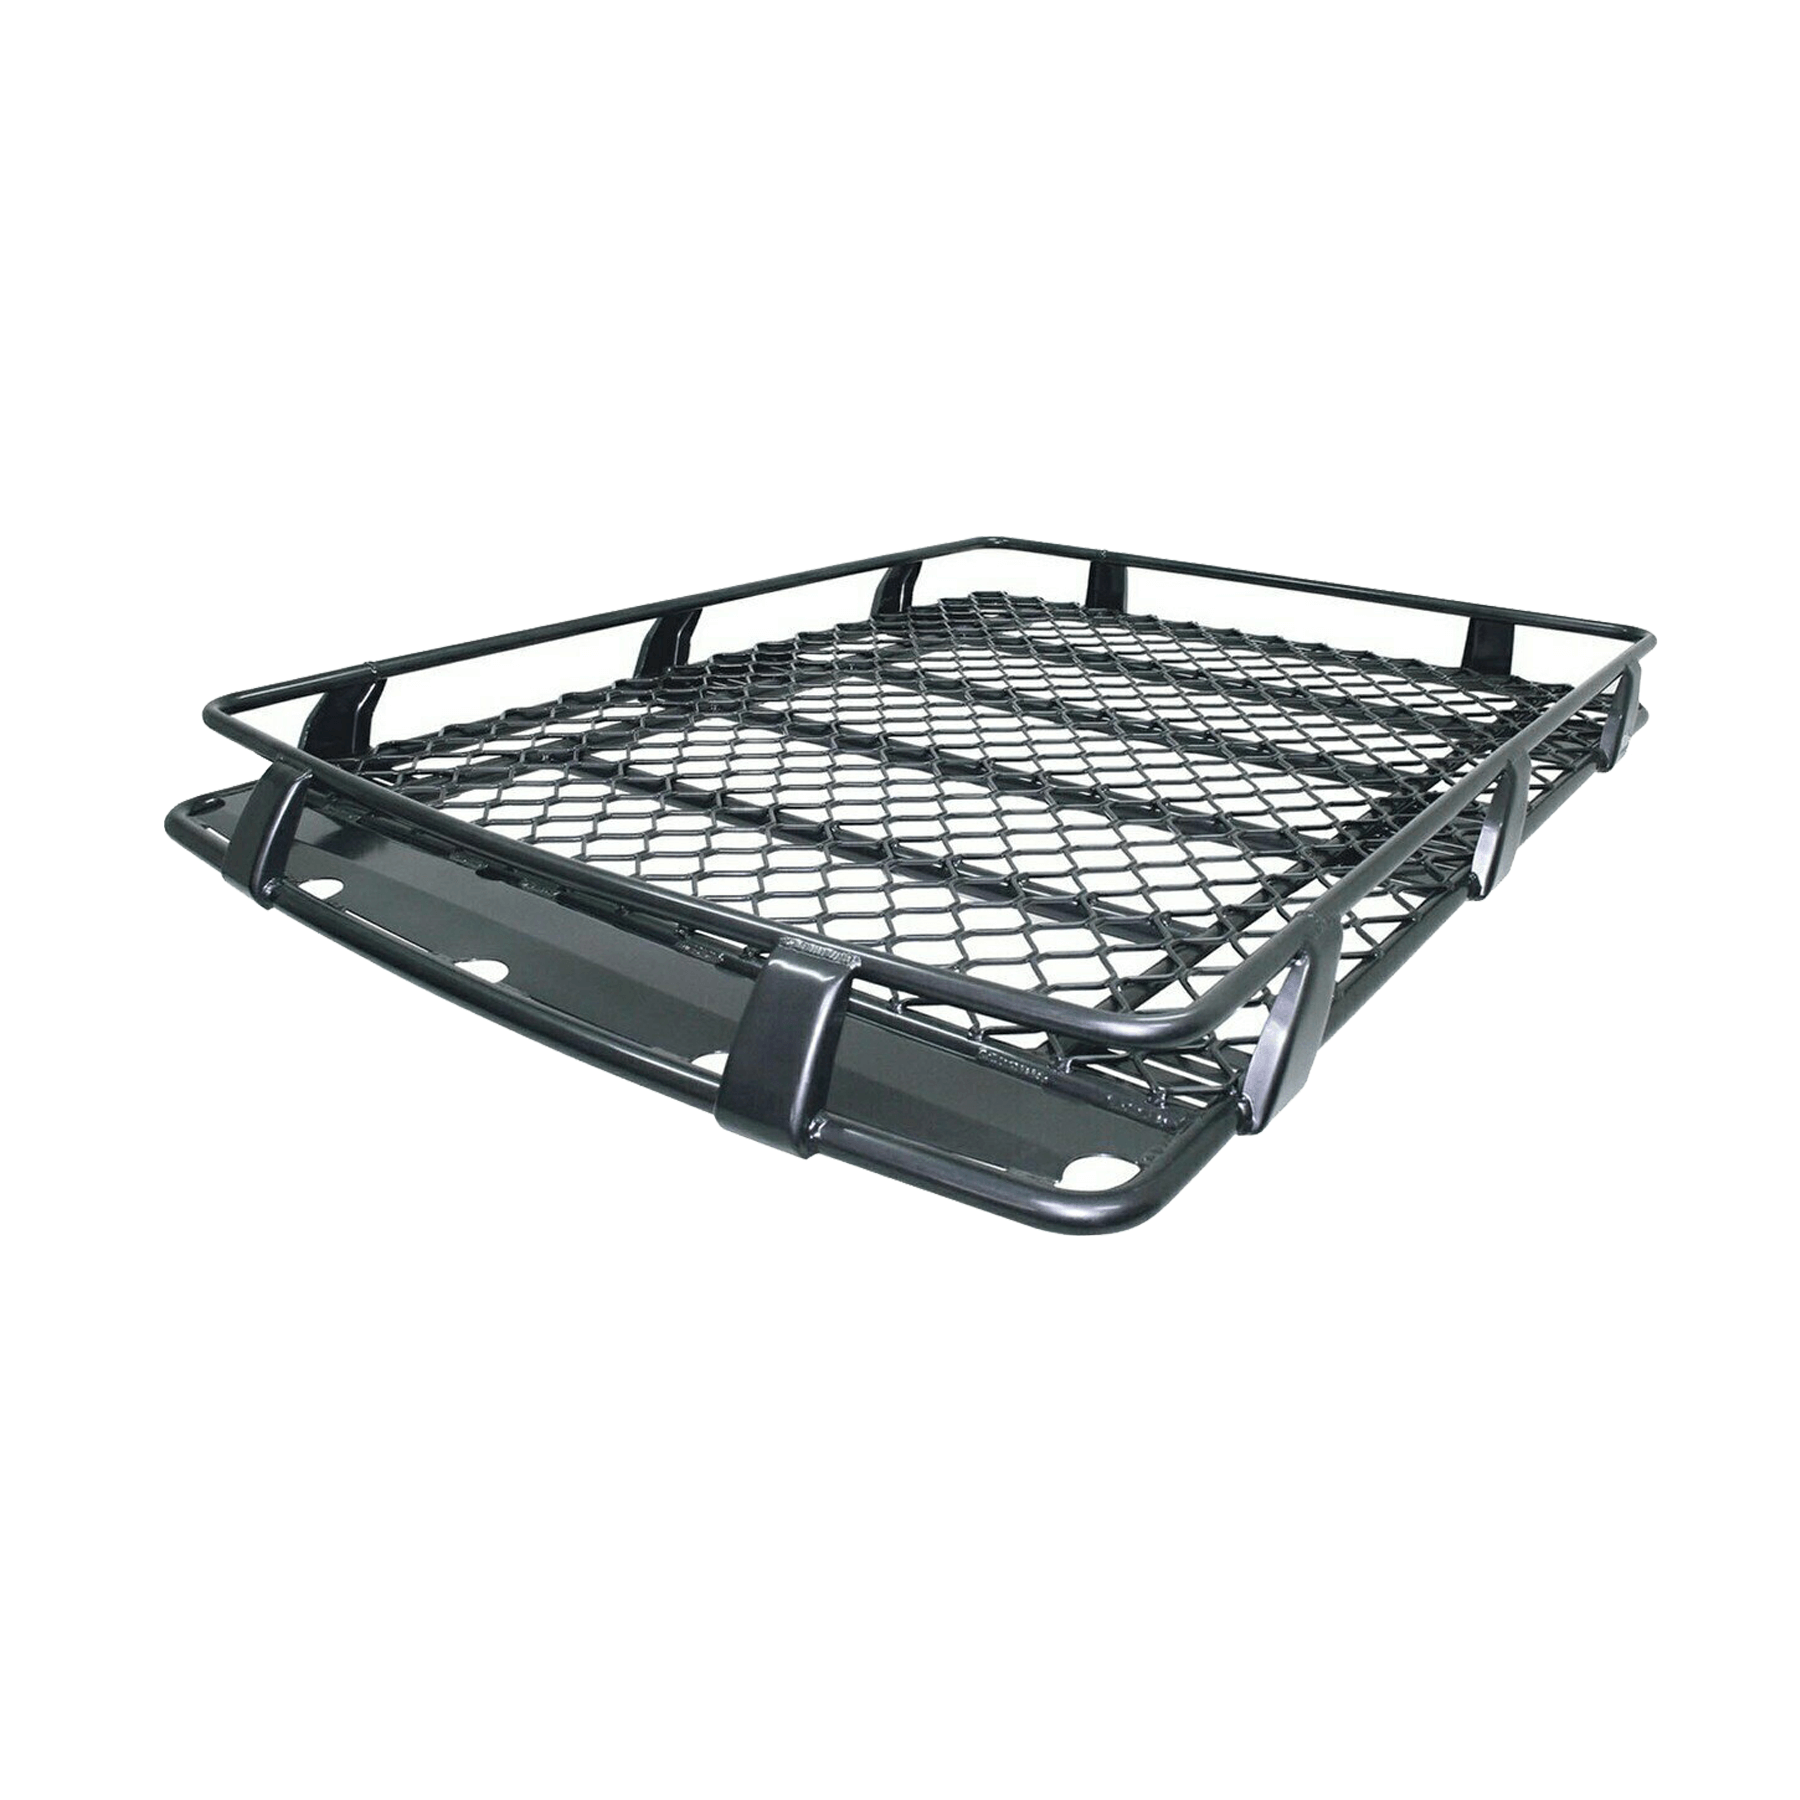 LANDCRUISER 200 SERIES 2007 to 2015 Basket Alloy Roof Rack- 1.8m x 1.25m (Open end)